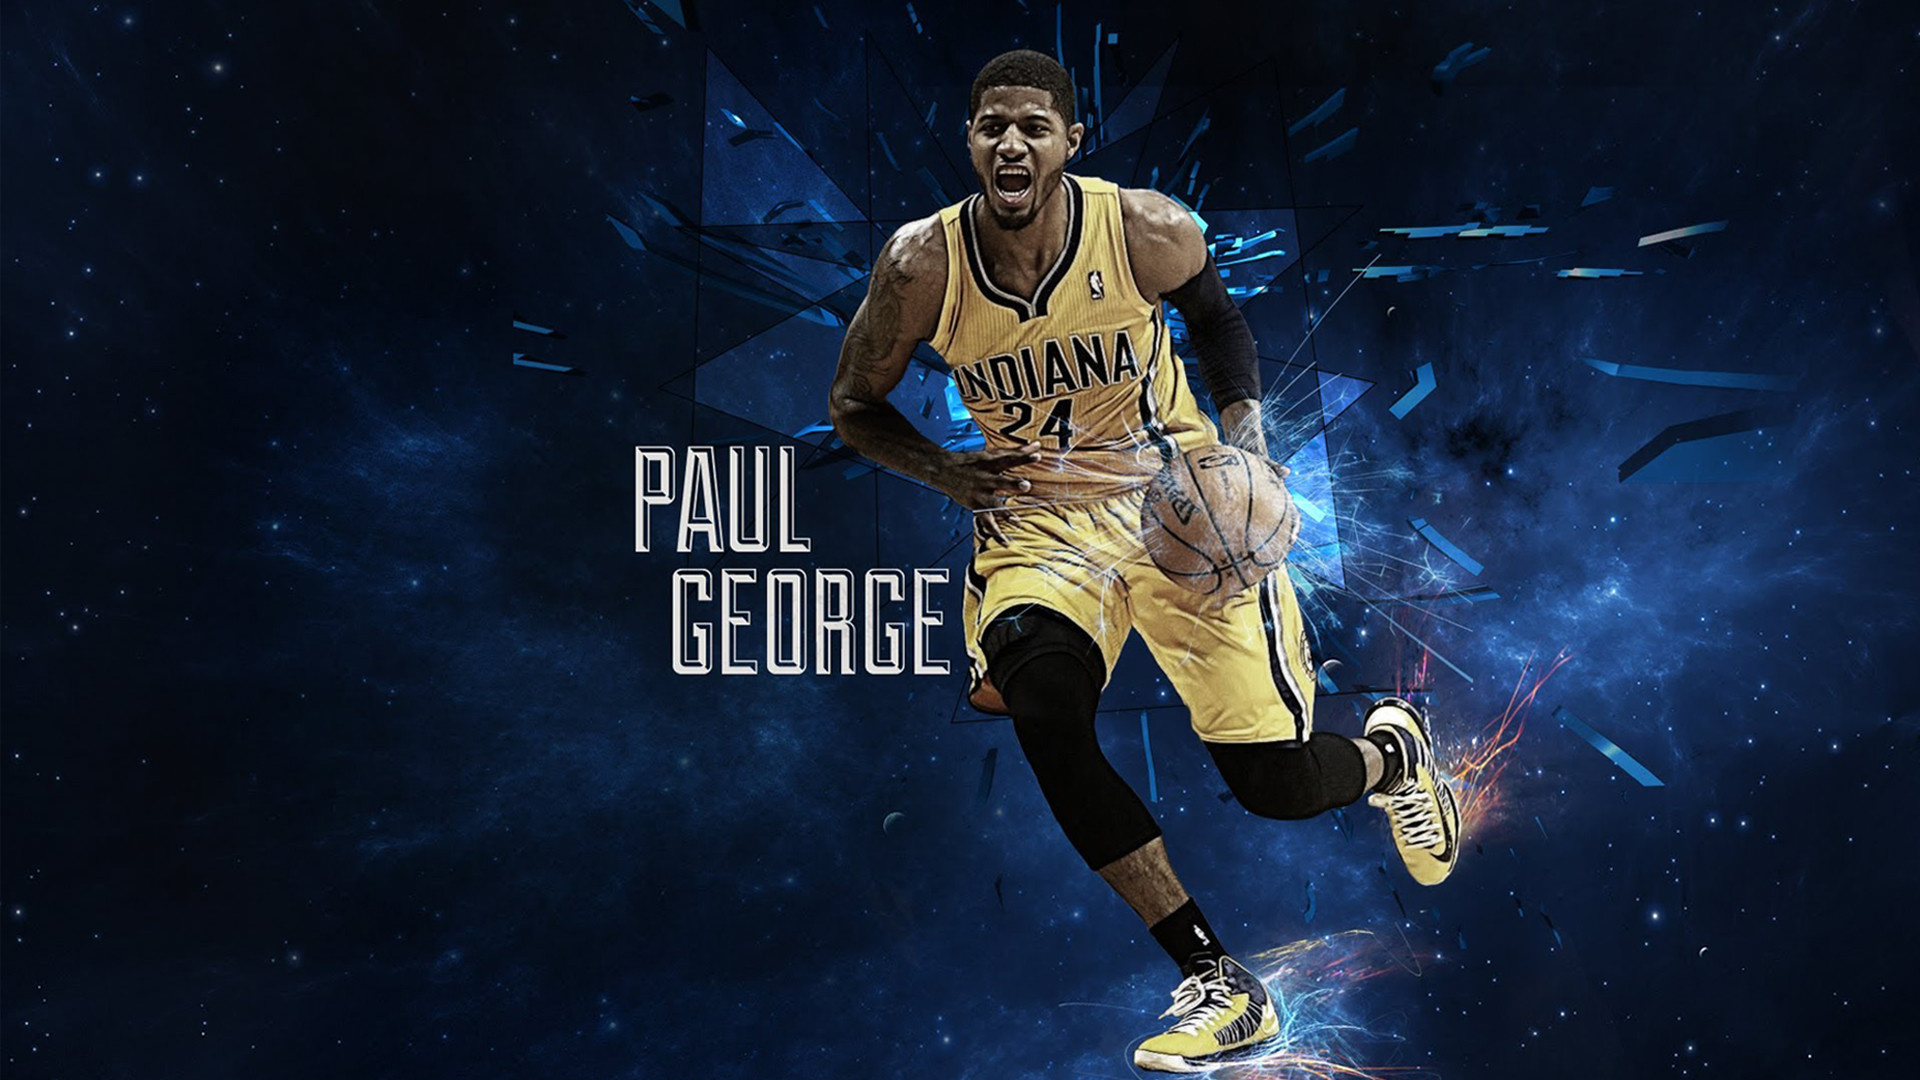 Paul George Indiana Pacers NBA Players HD Wallpaper Free.